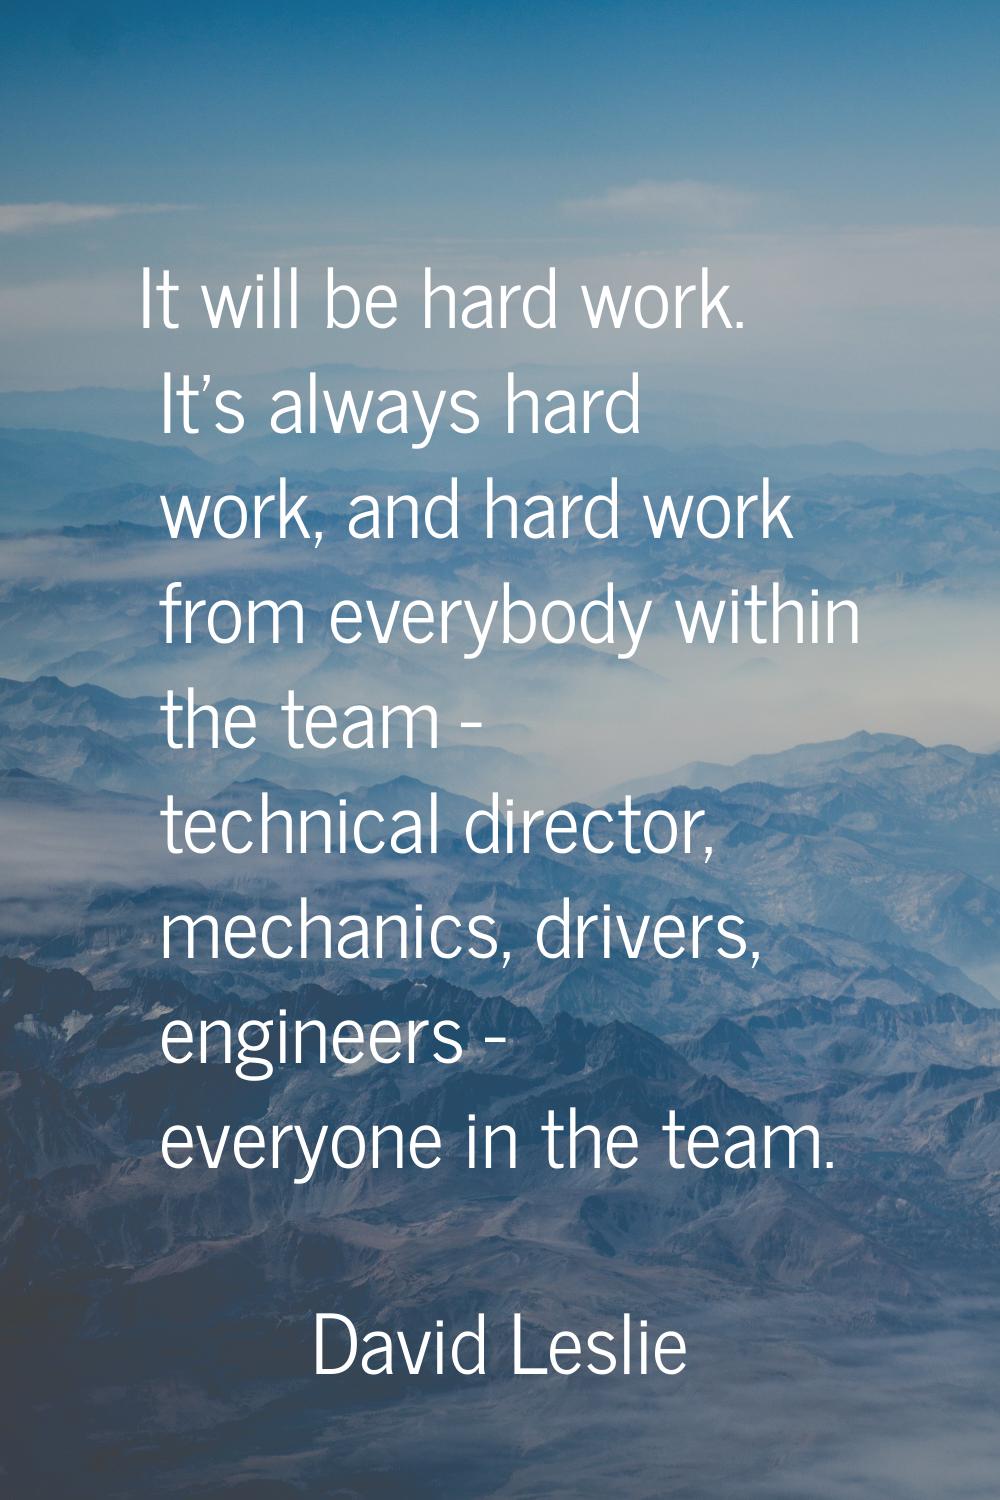 It will be hard work. It's always hard work, and hard work from everybody within the team - technic